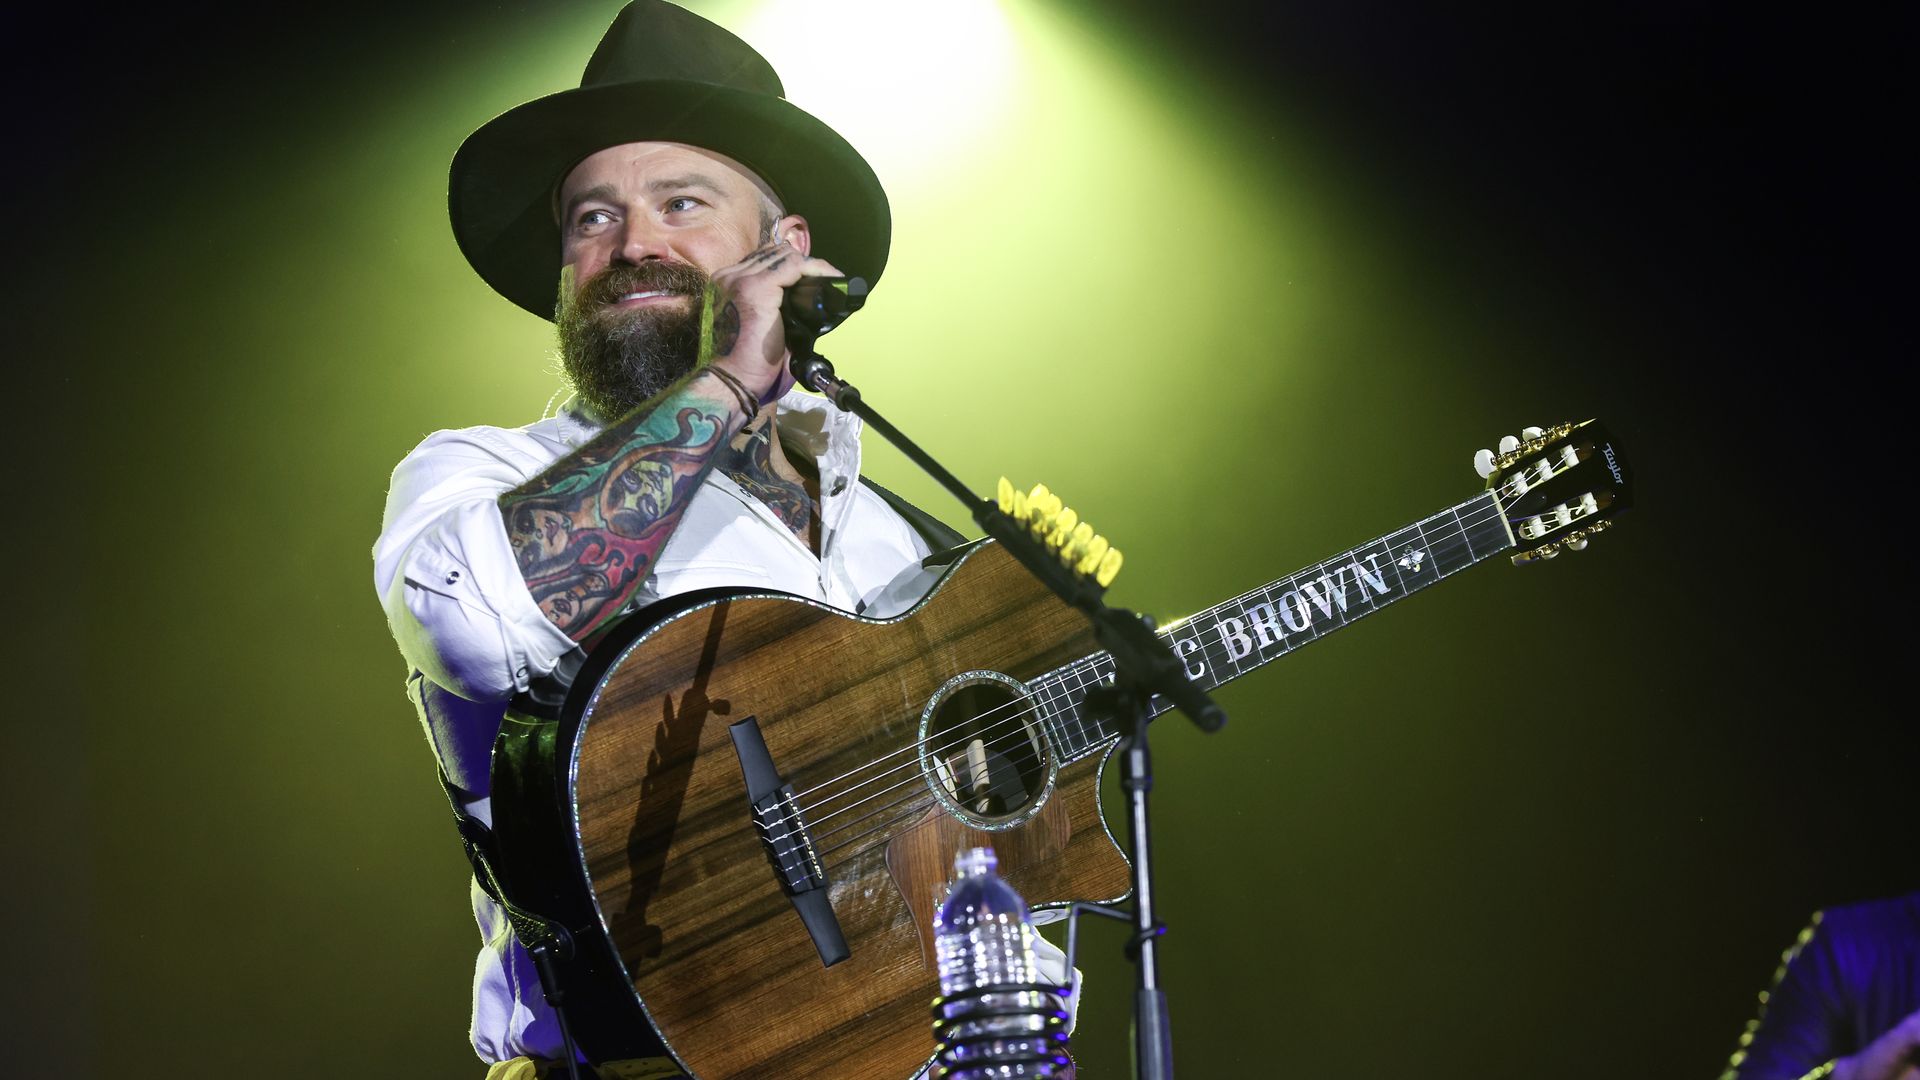 Zac Brown of the Zac Brown Band on stage holding a guitar in front of a microphone. 